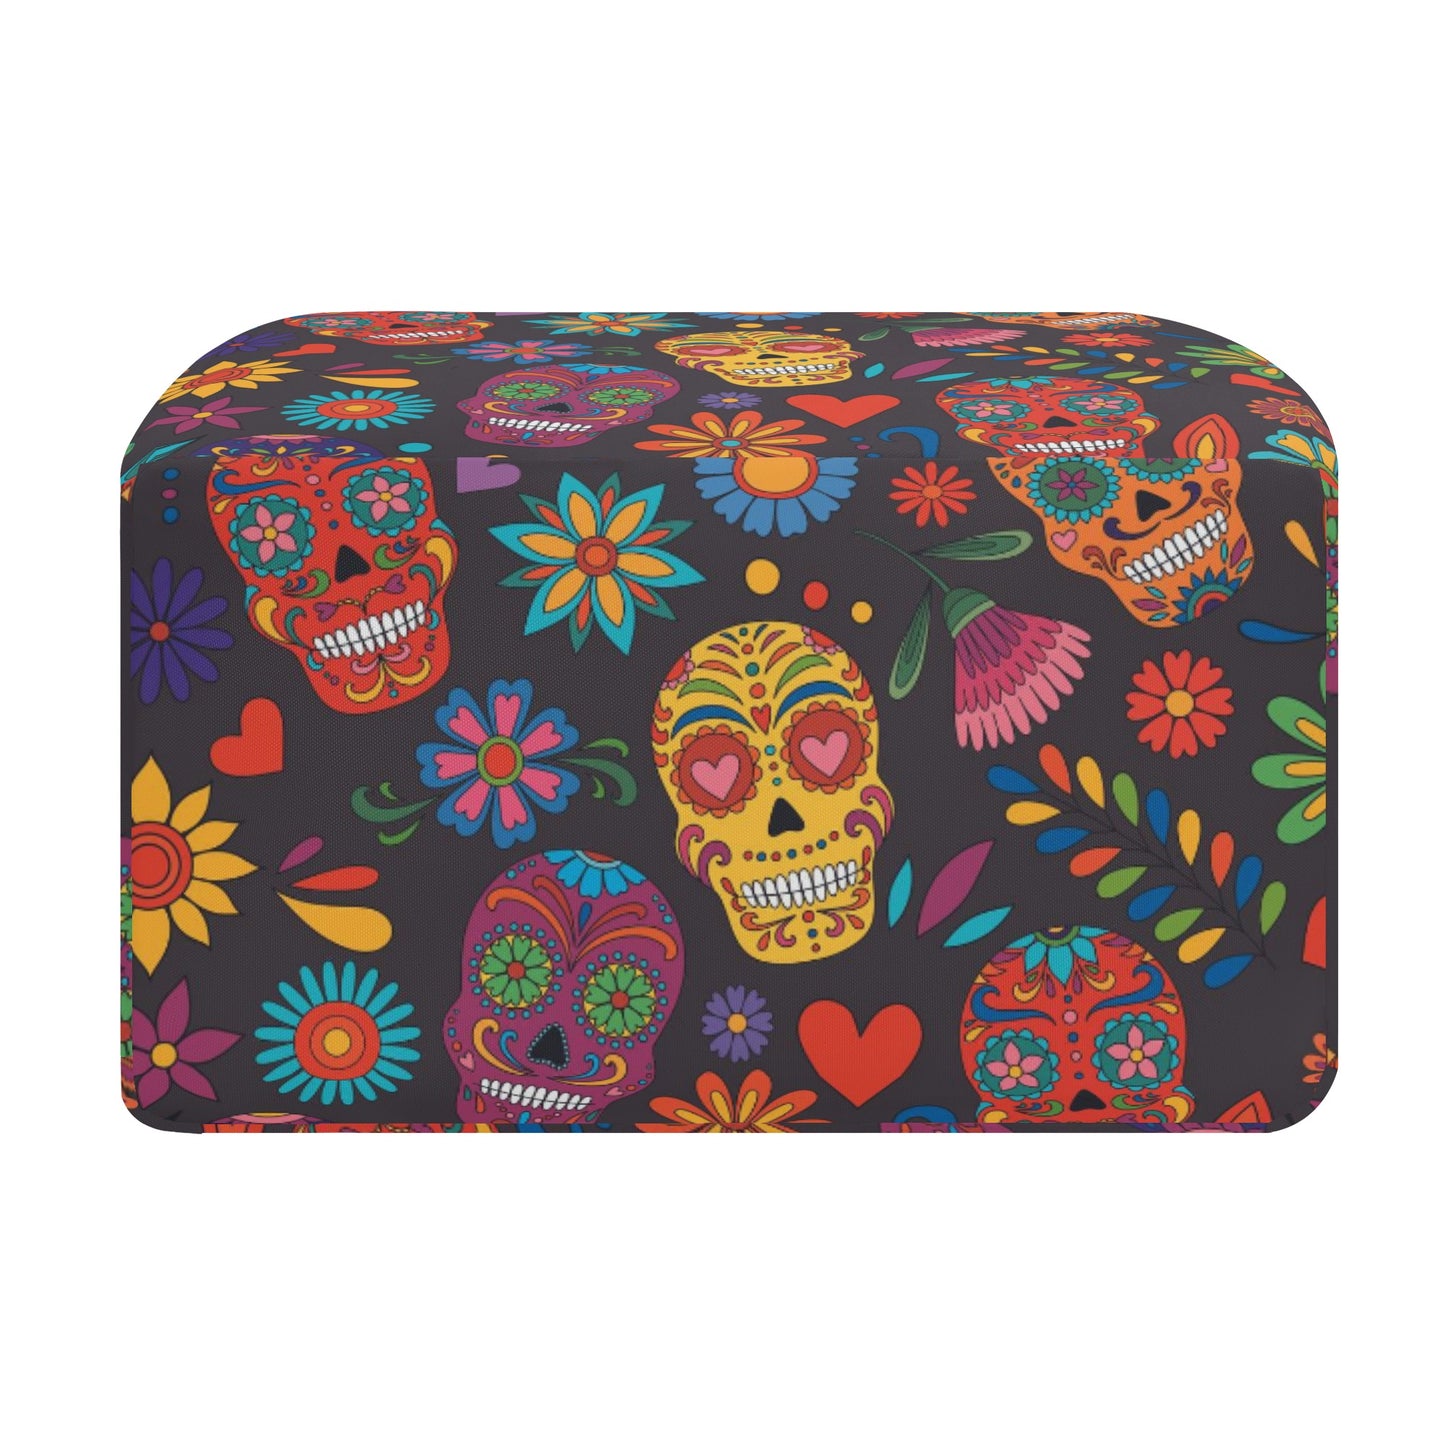 Floral skull pattern Day of the dead Portable Tote Lunch Bag